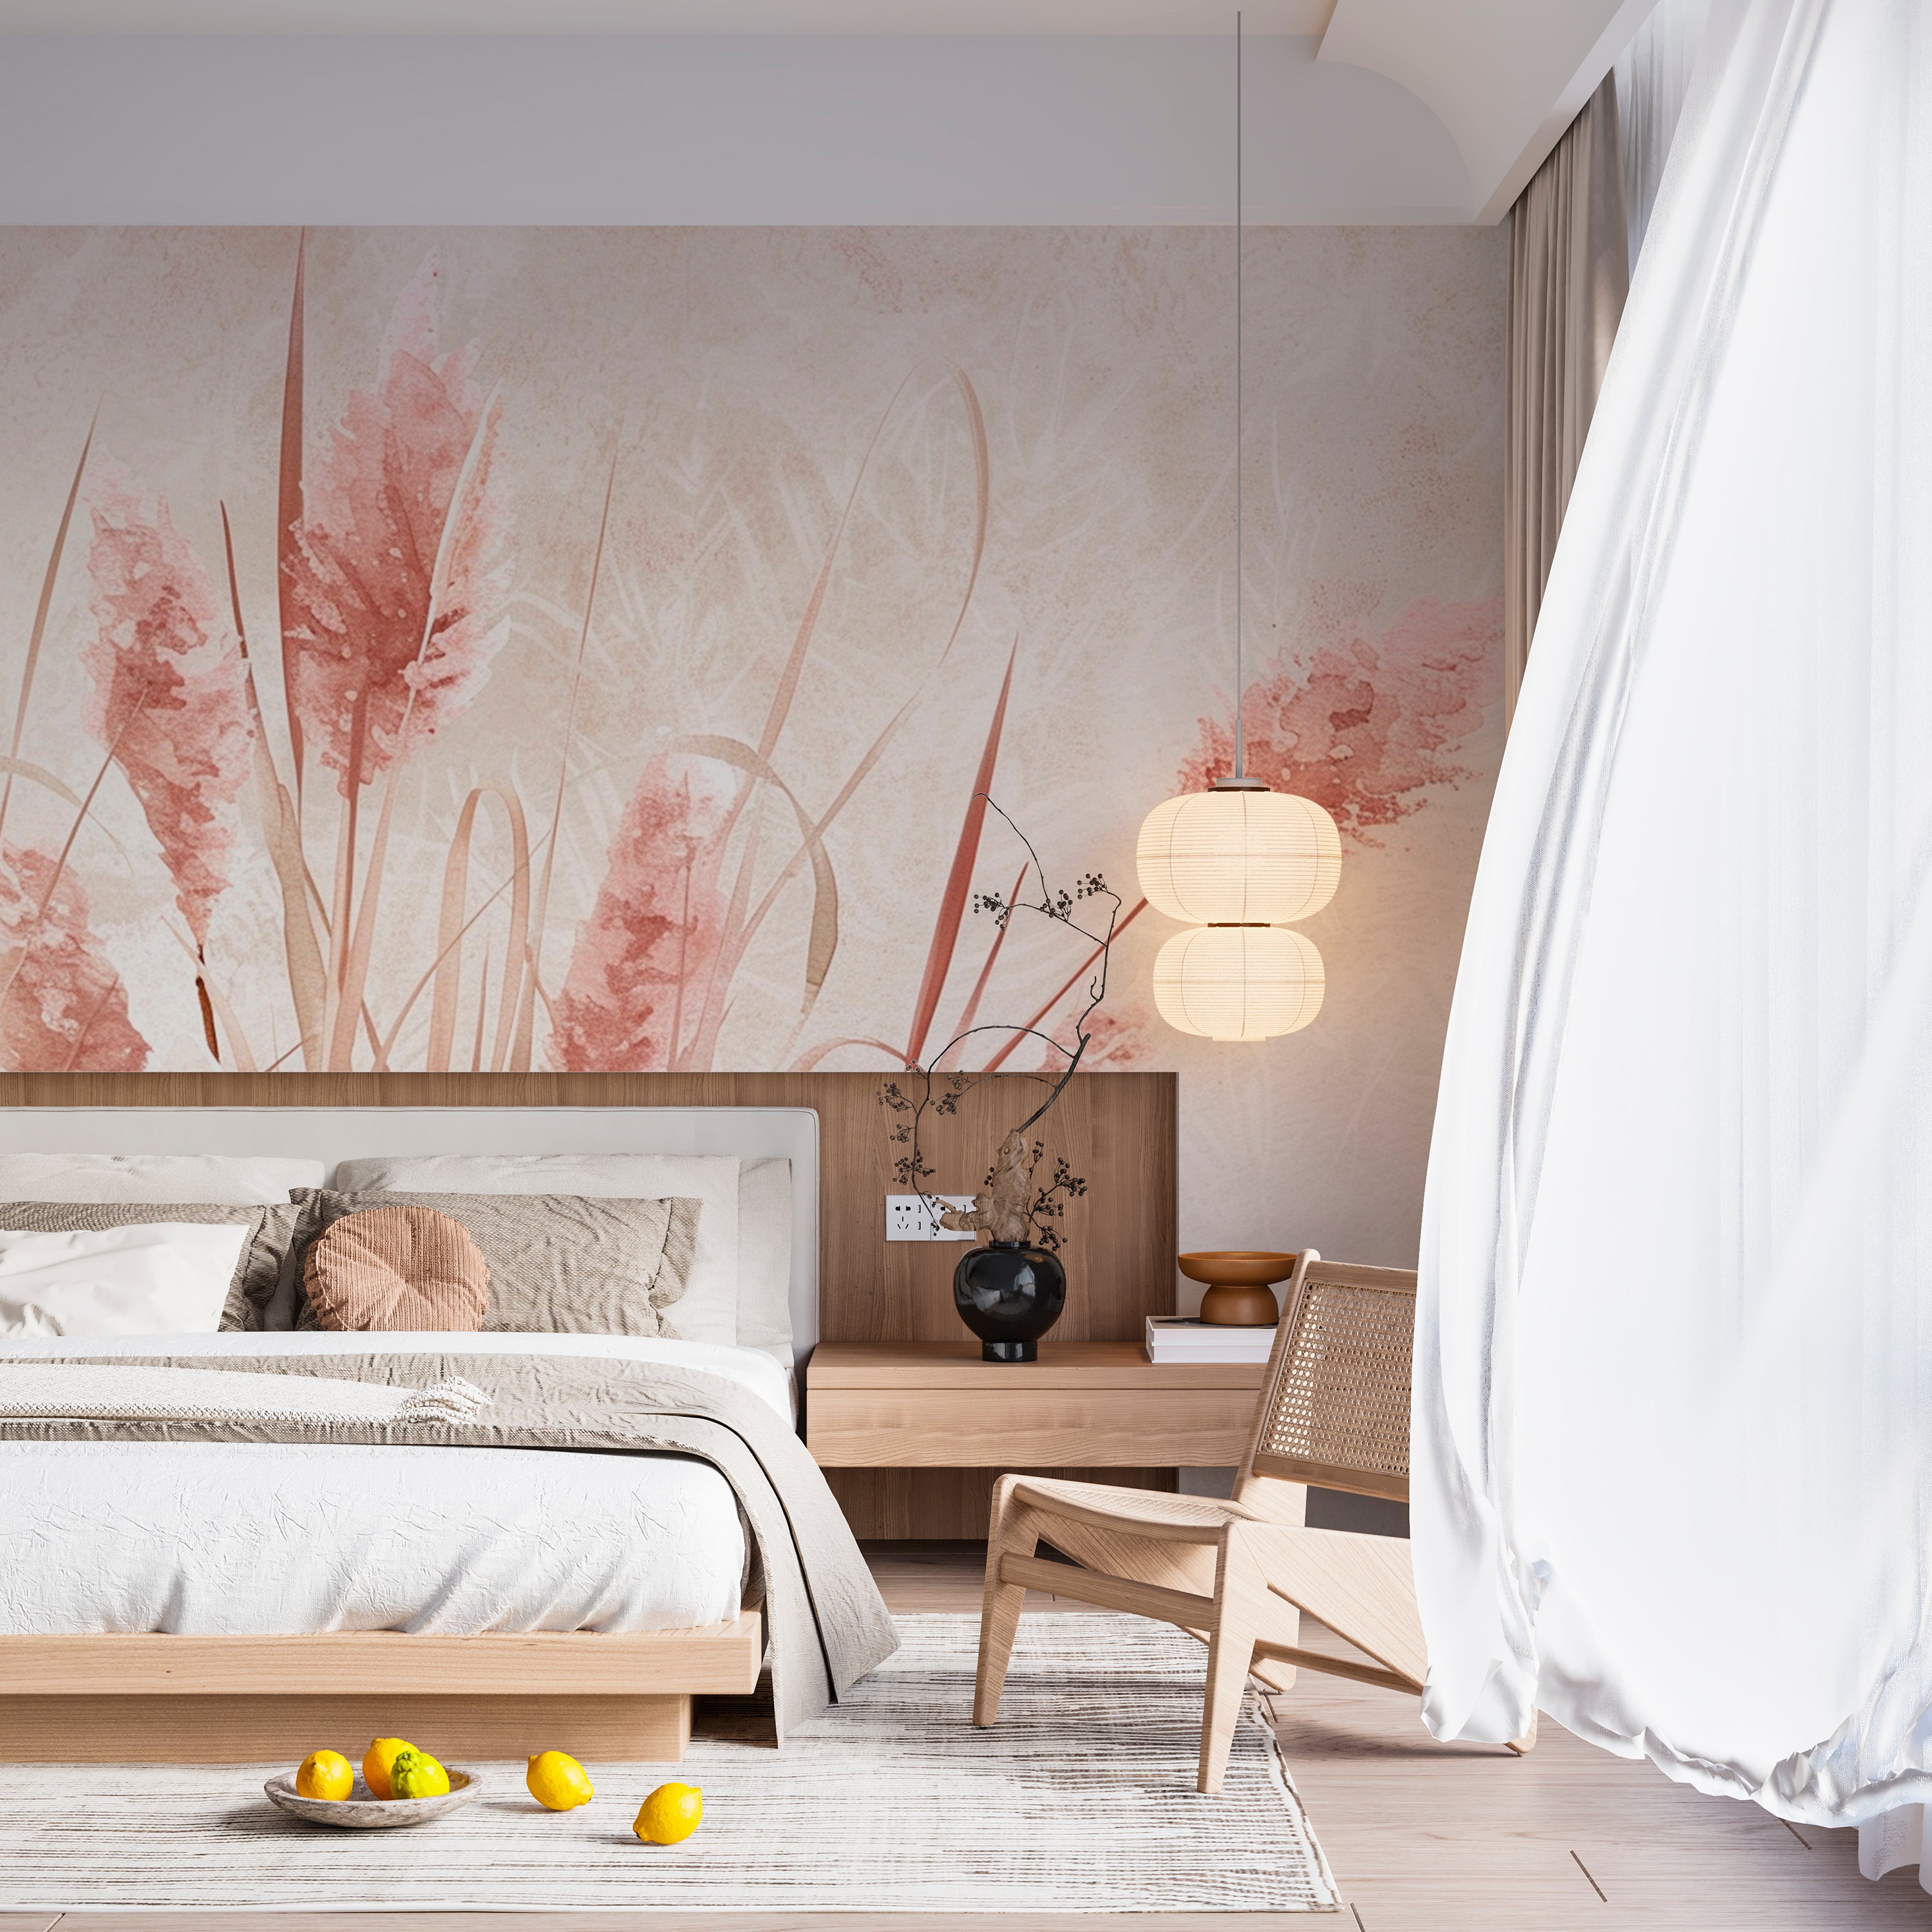 Pastel Reeds: Delicate Nature for a Serene Interior